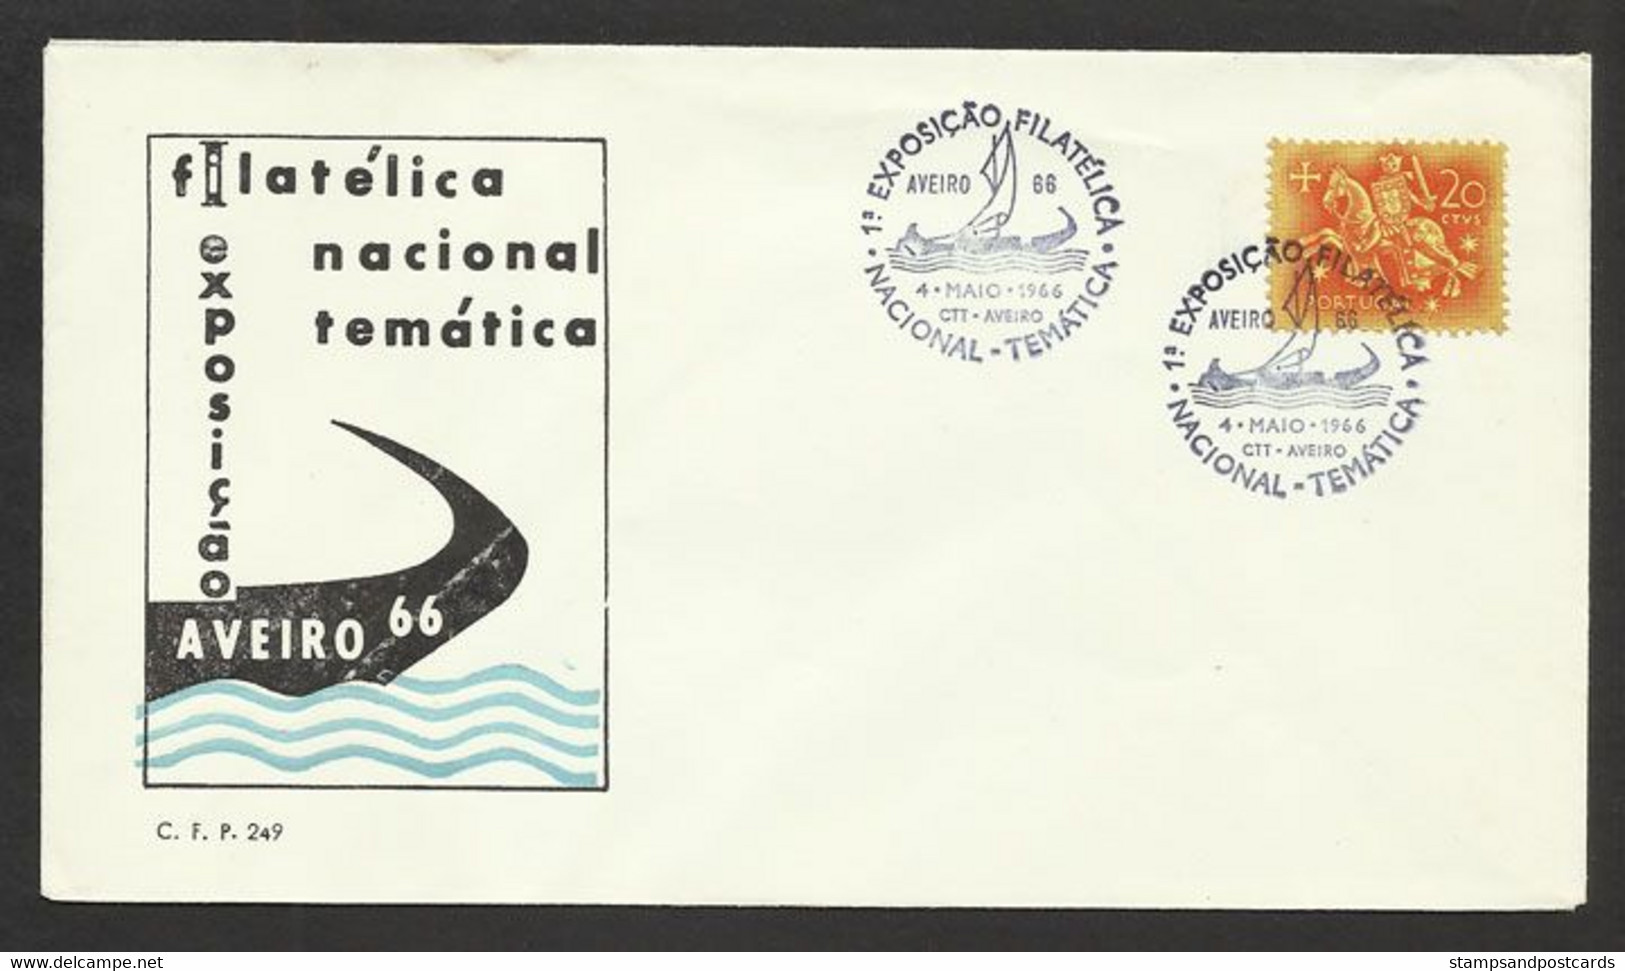 Portugal Bateau Traditionelle Aveiro 1966 Cachet Commemoratif Traditional Boat Aveiro Event Postmark - Flammes & Oblitérations